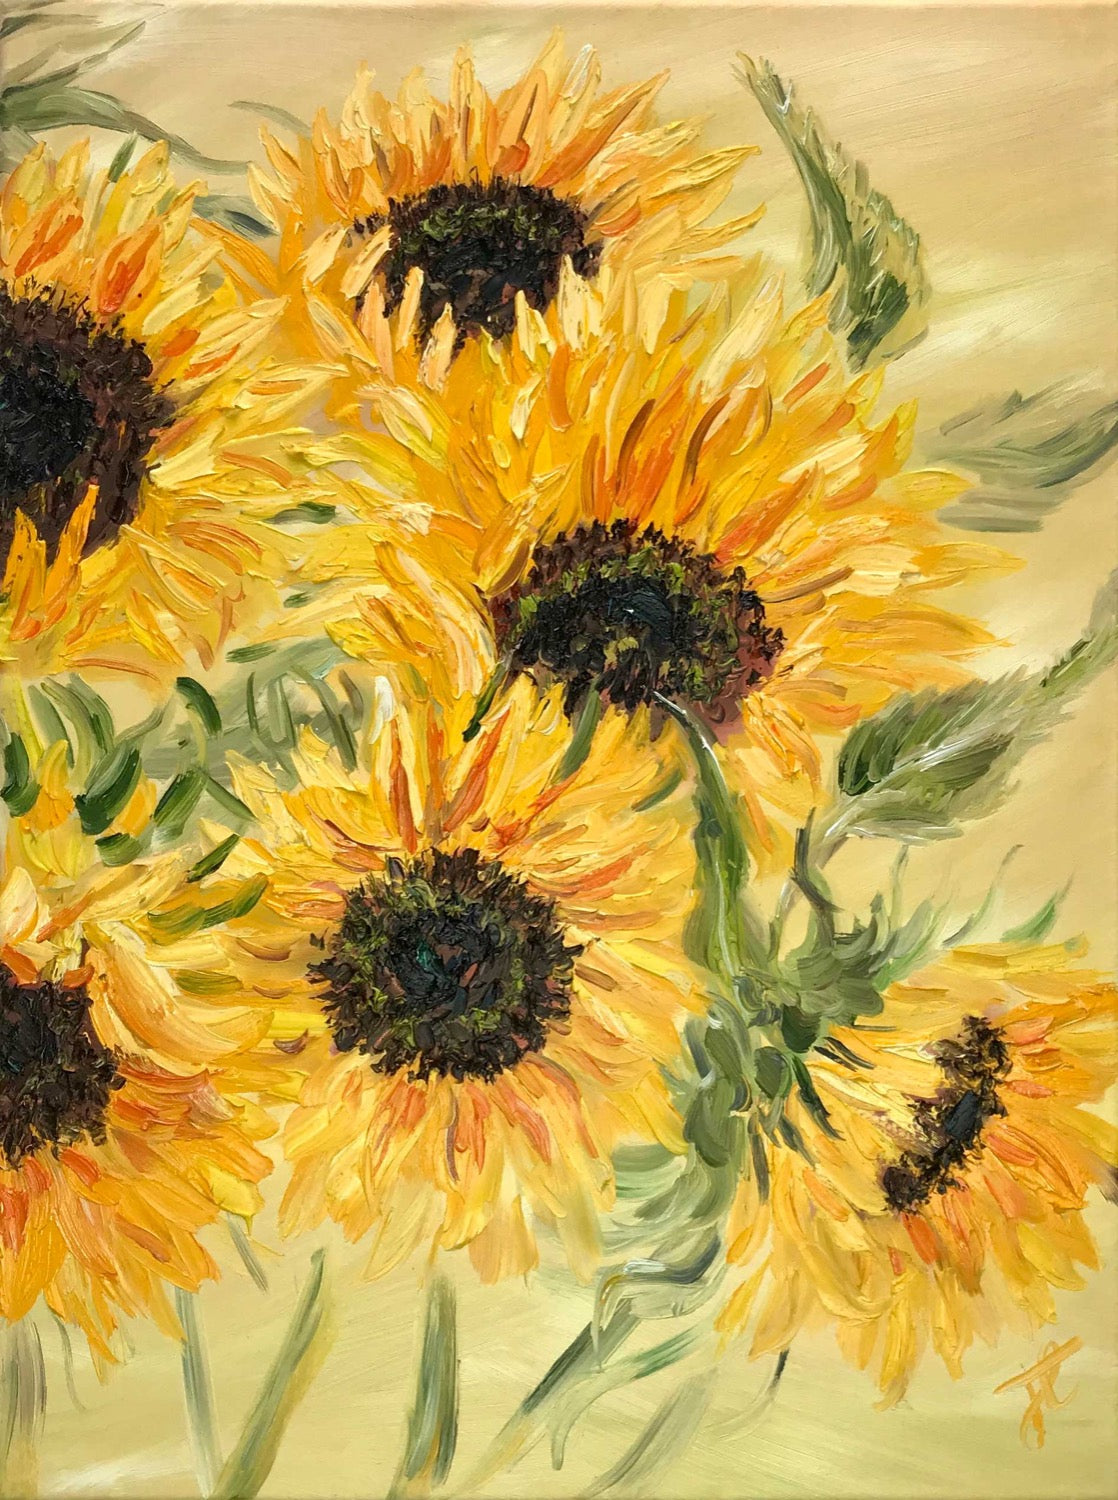 Holding on to summer – sunflower oil painting by Jeanne-Louise Art